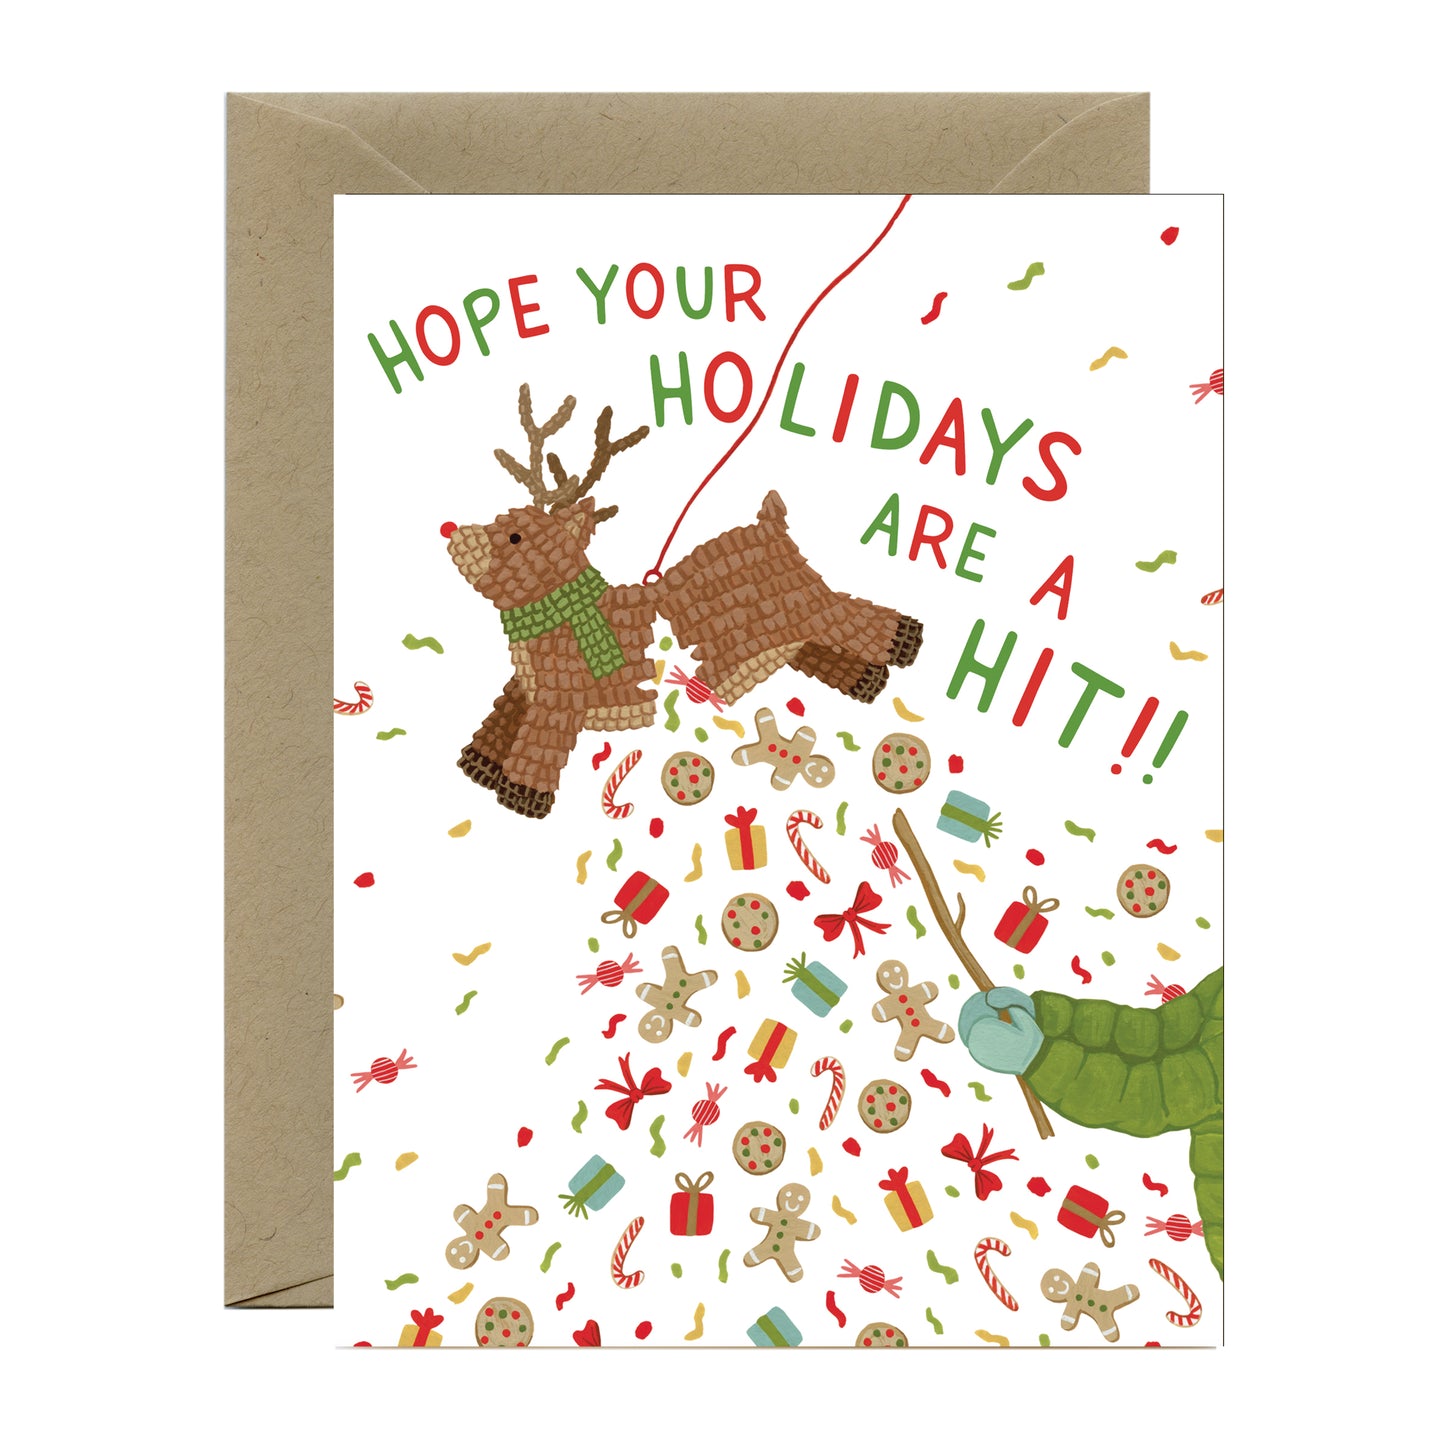 REINDEER PIÑATA - HOLIDAY GREETING CARDS, BOXED SET OF 8